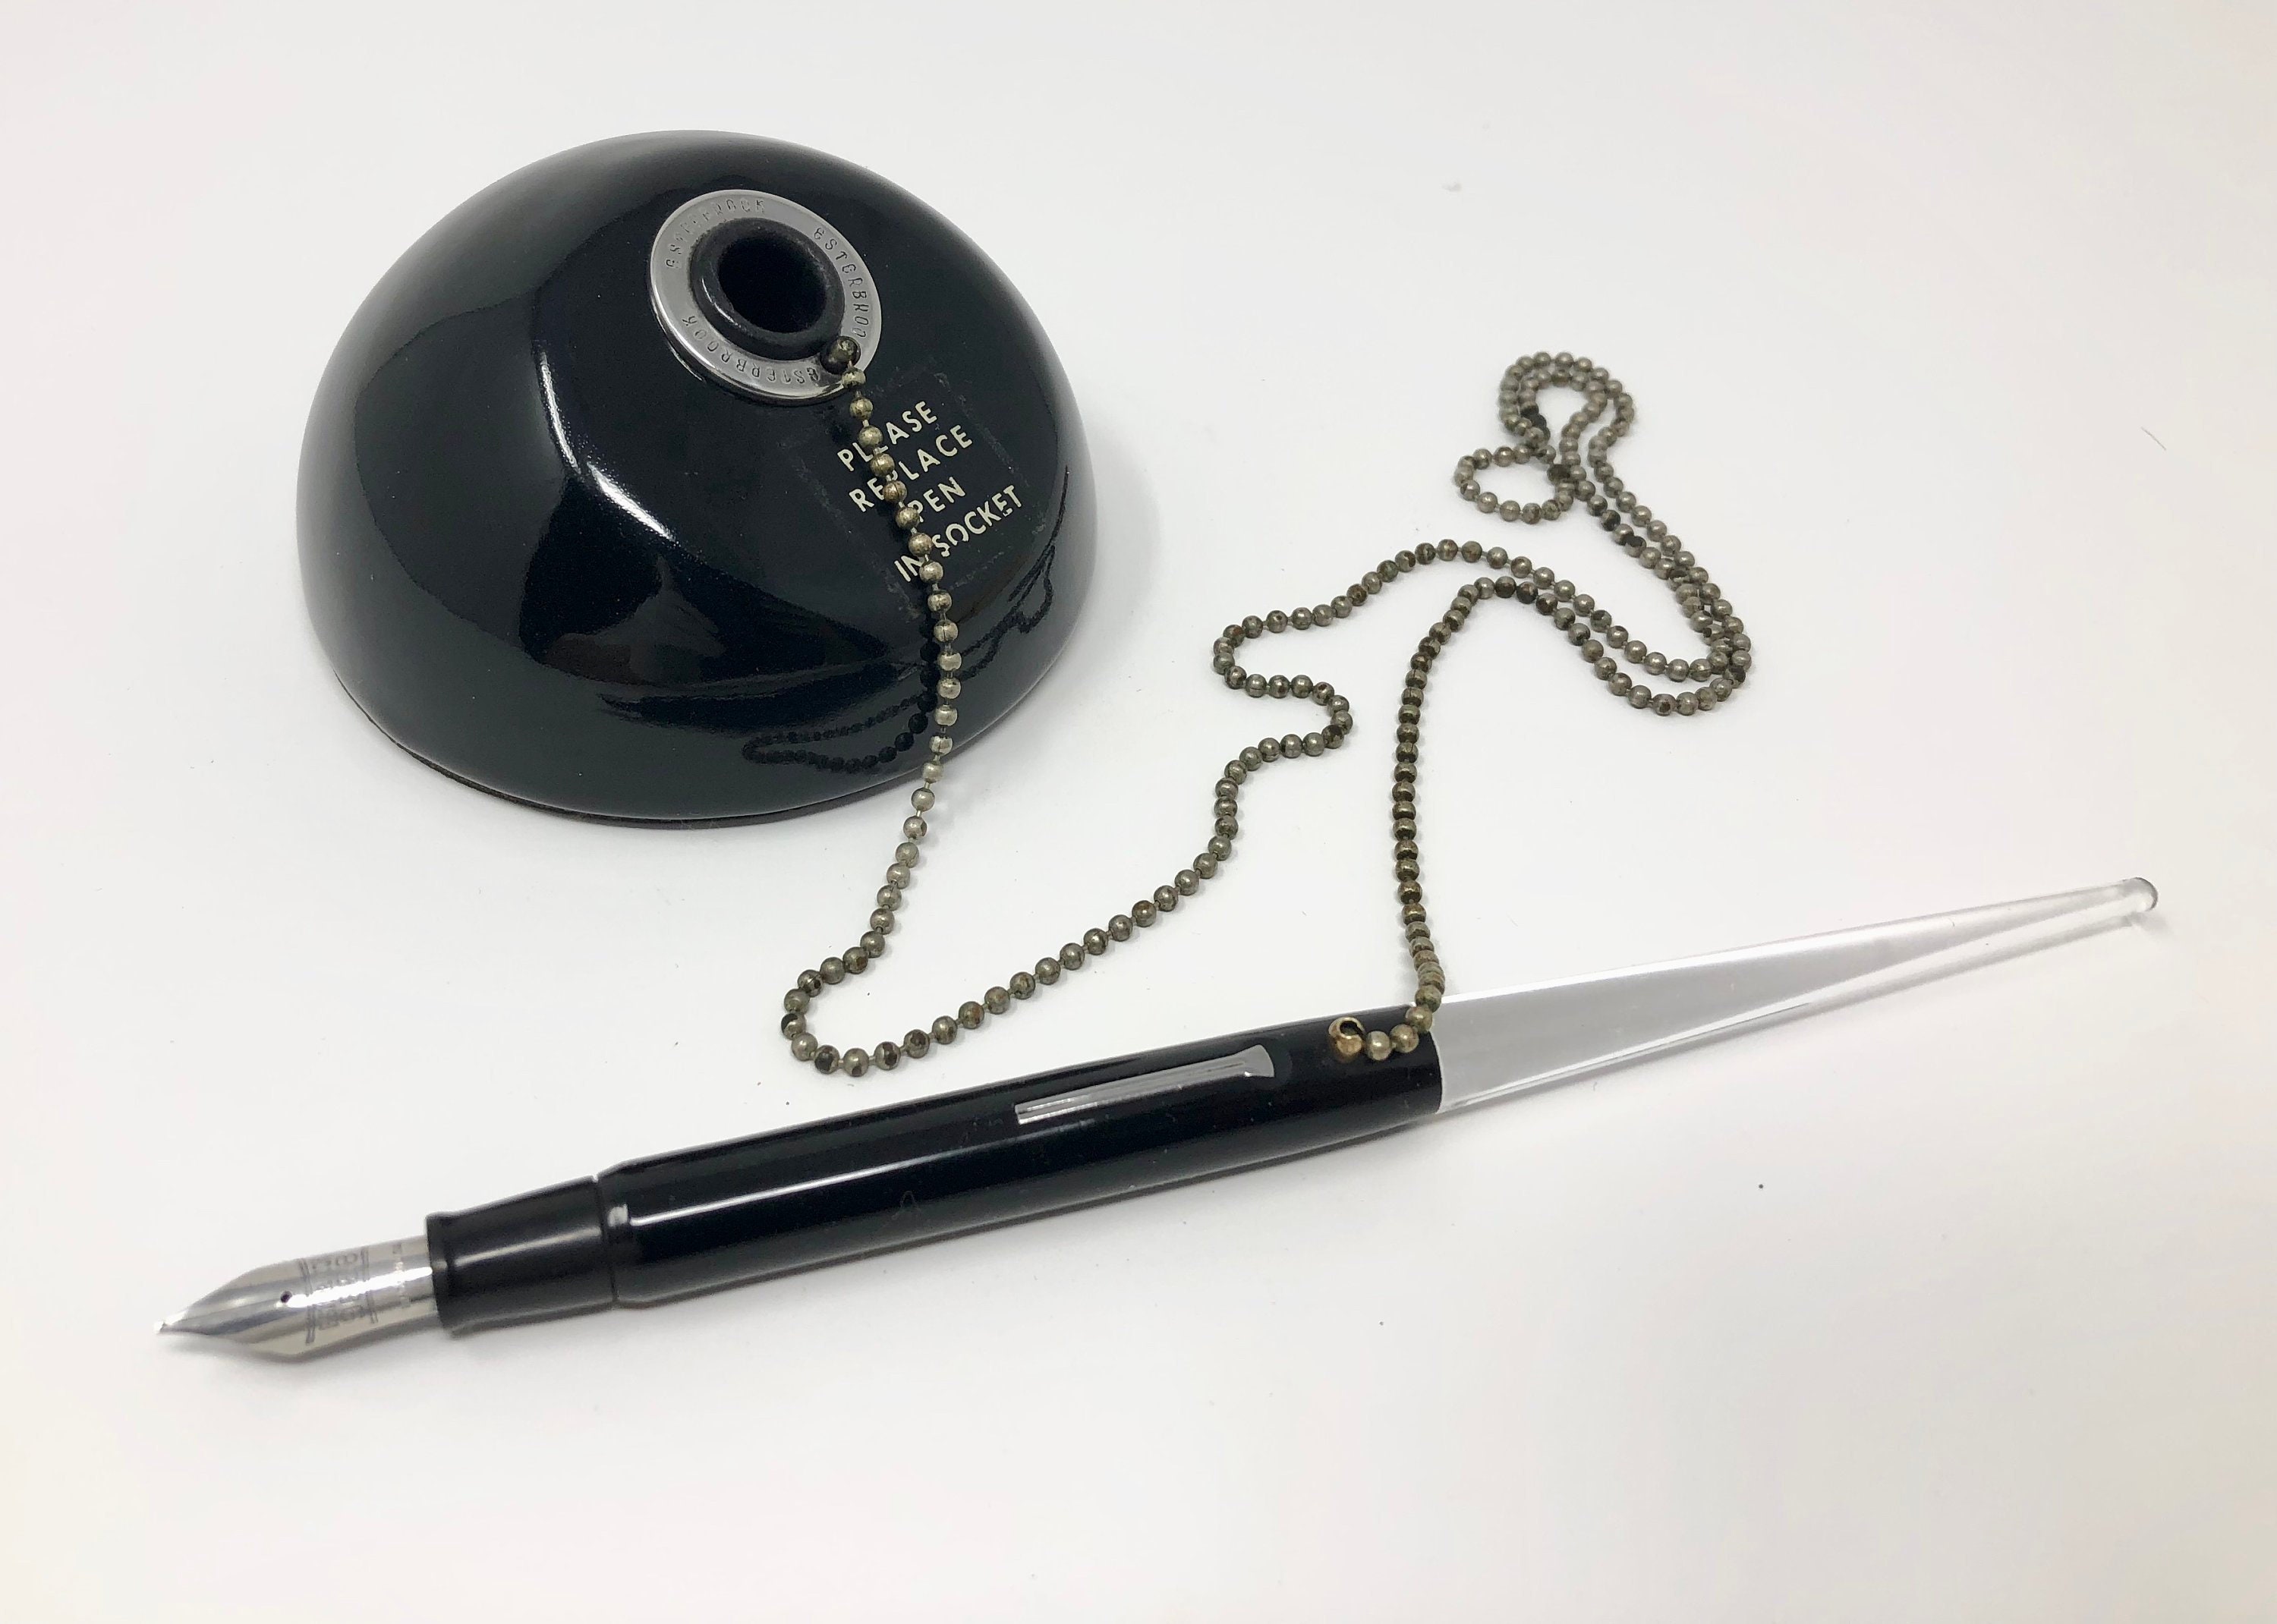 Esterbrook 8 Ball Desk Set With Chain Restored Etsy